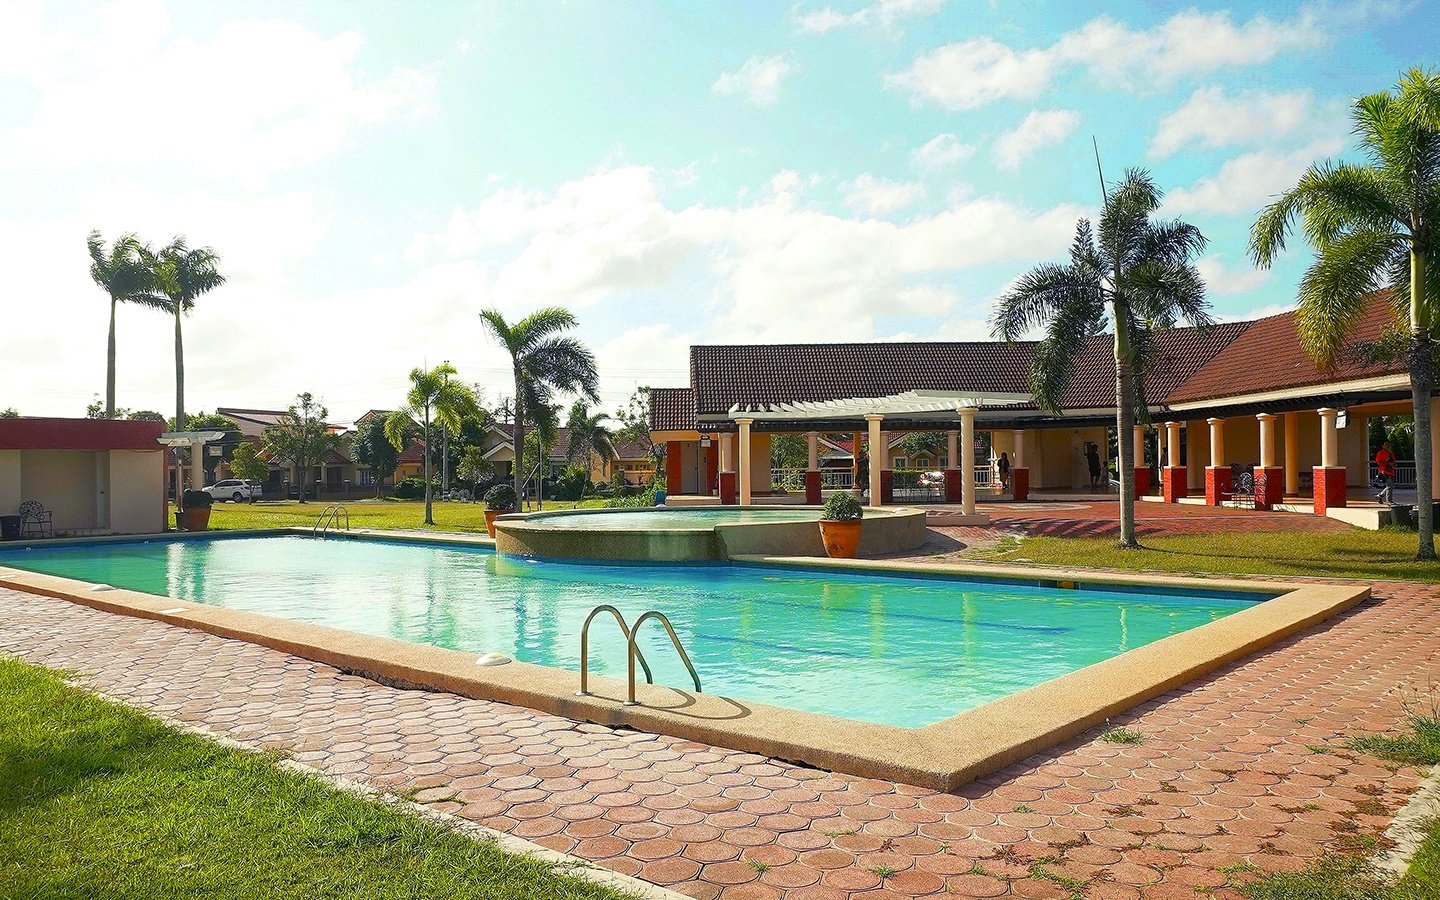 Camella Savannah Clubhouse and Swimming Pool in Iloilo City